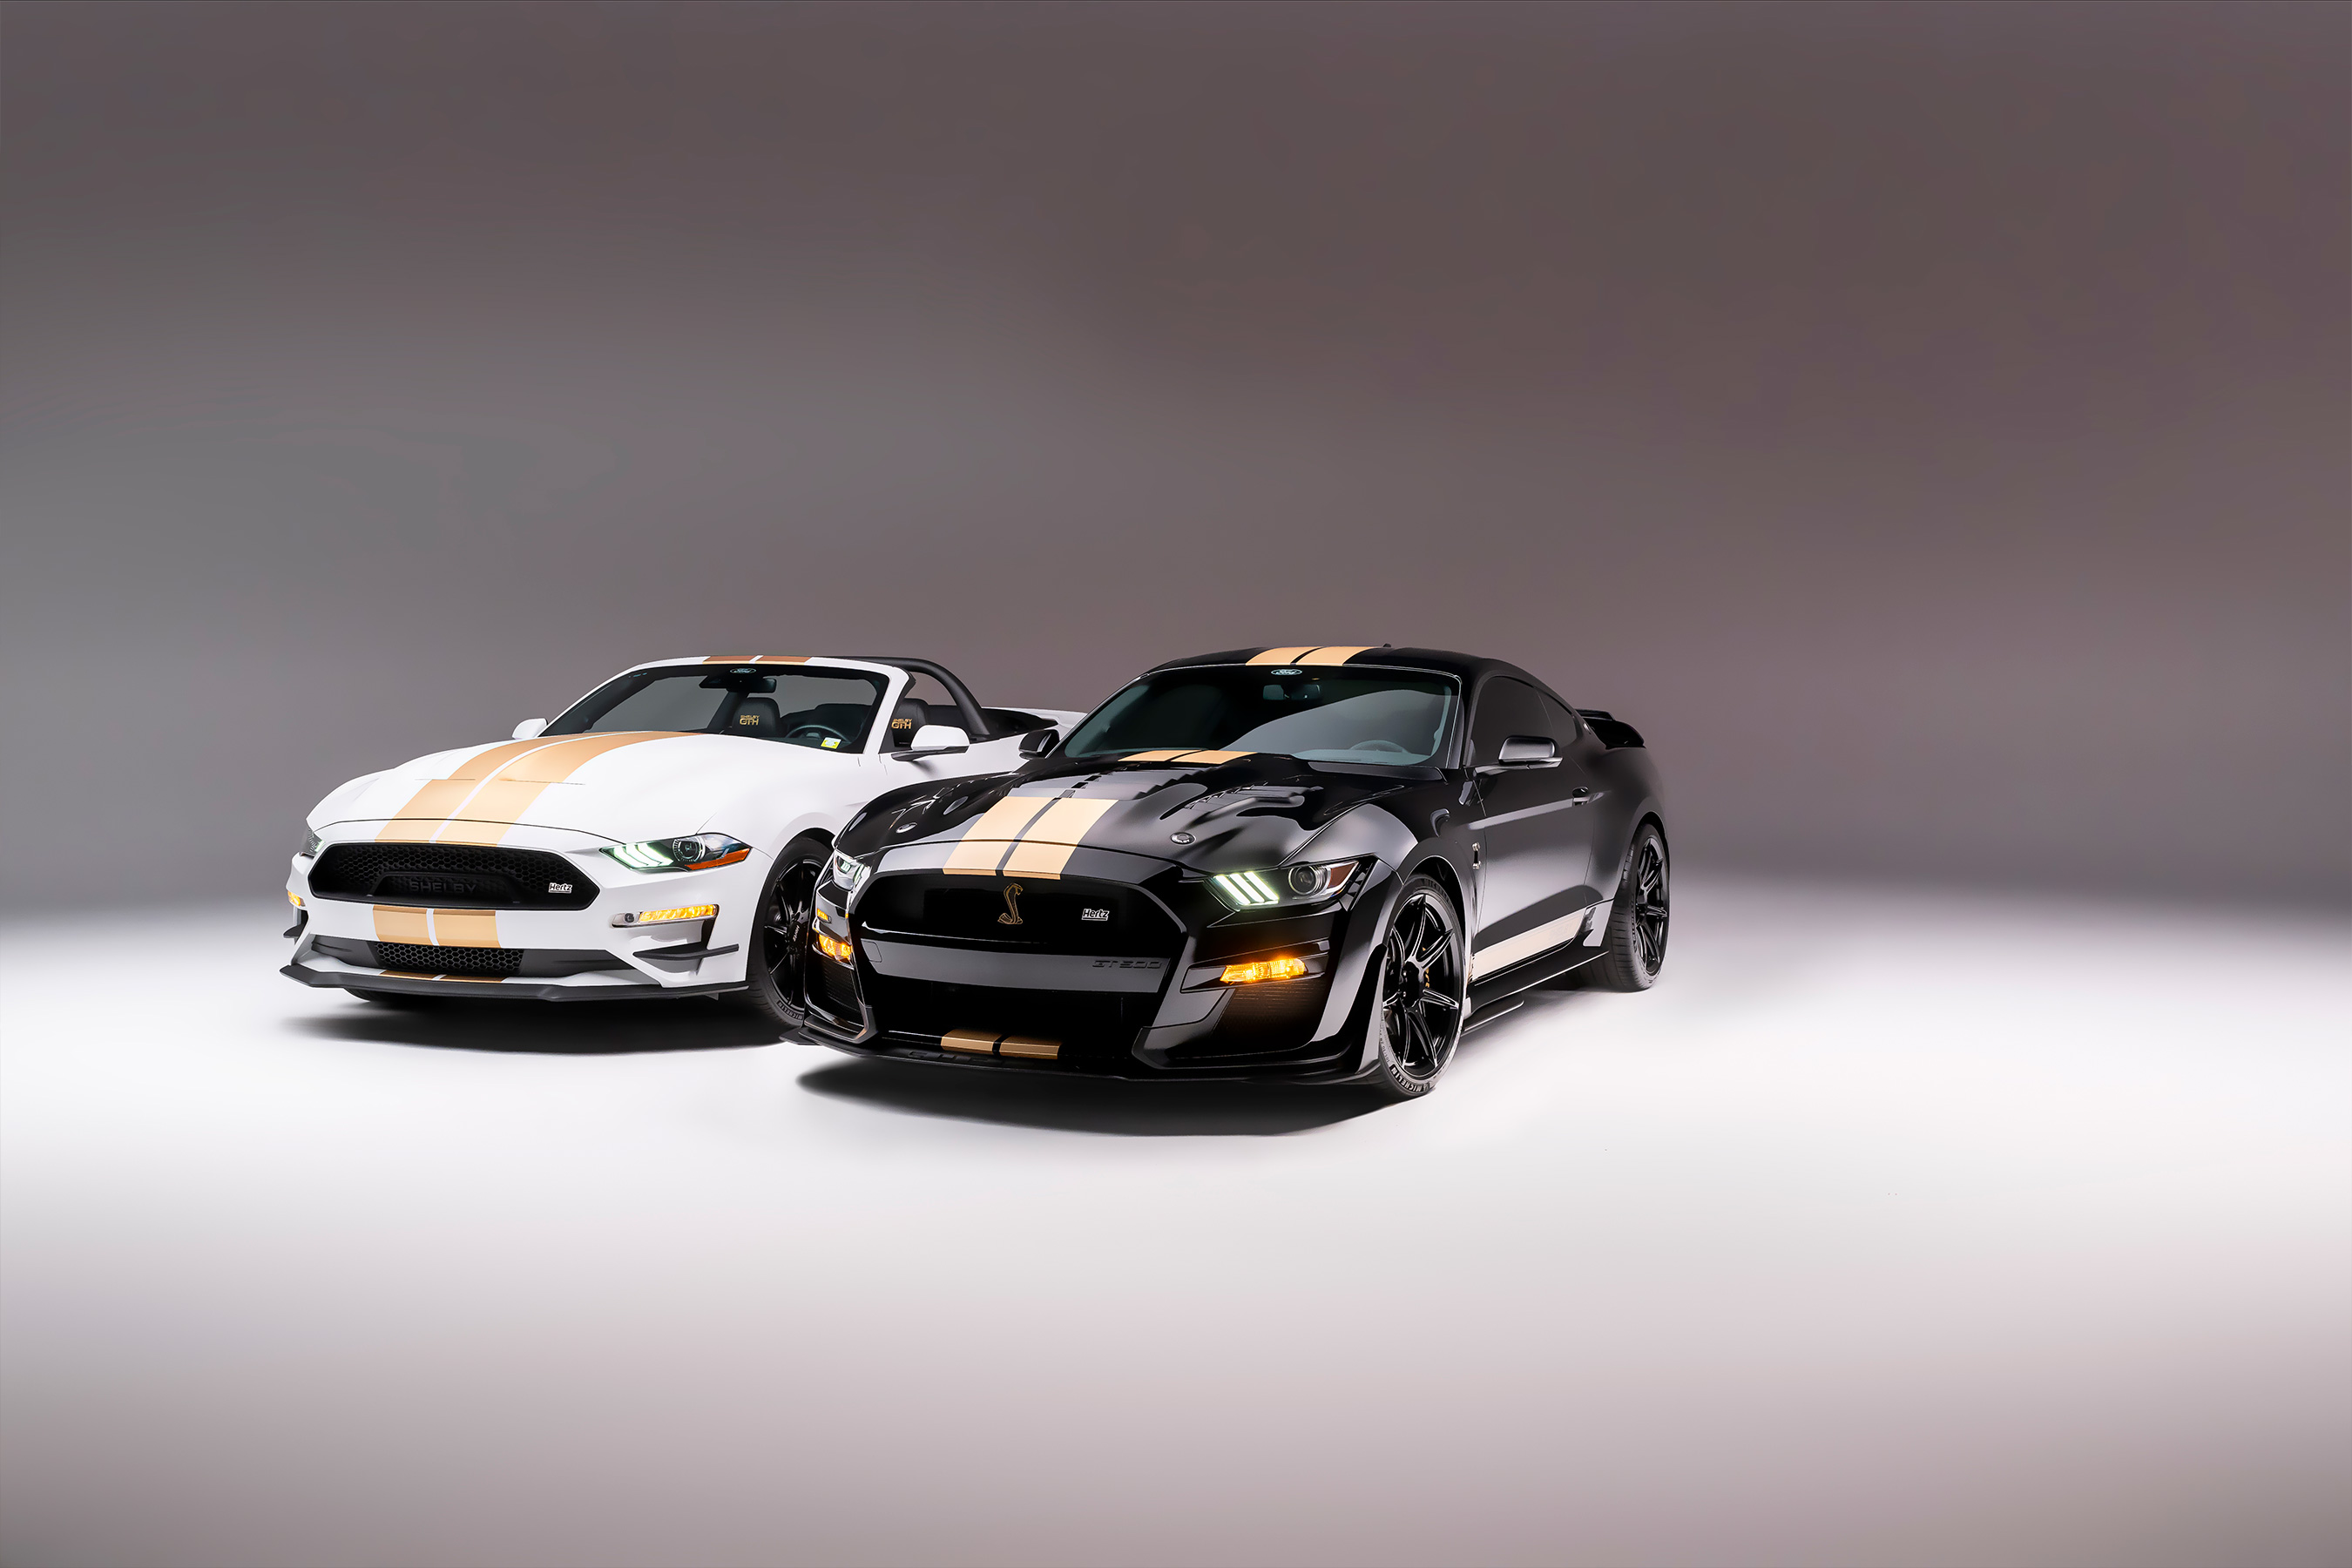 Paying tribute to the original Hertz Shelby “Rent-A-Racer” program, the collection builds on Hertz’s legacy to give consumers the unique opportunity to drive elite, high-performance vehicles.